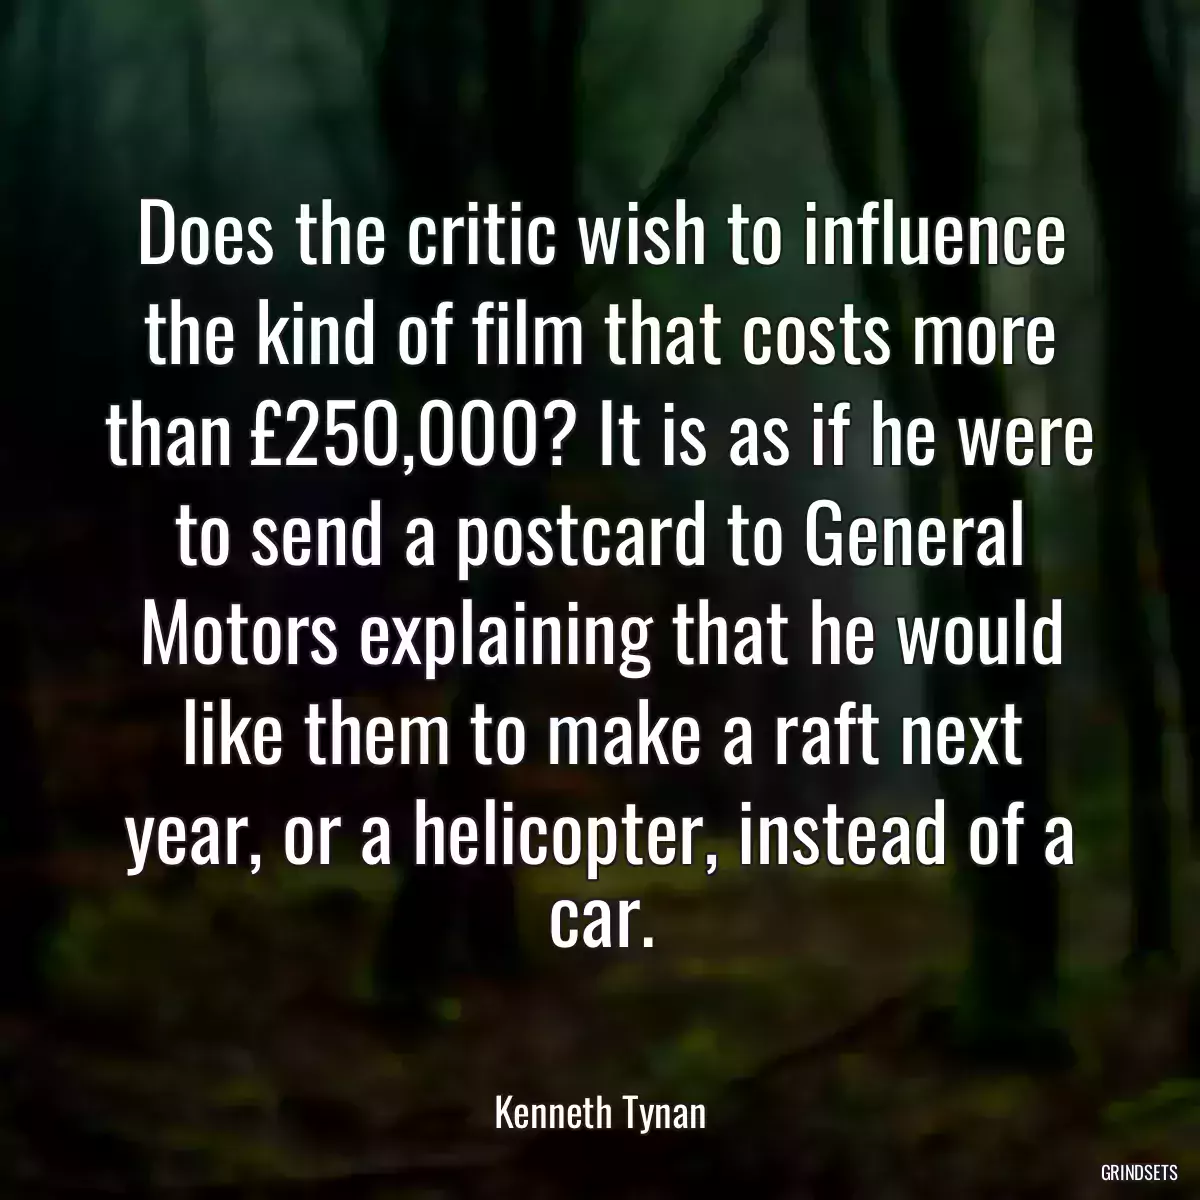 Does the critic wish to influence the kind of film that costs more than £250,000? It is as if he were to send a postcard to General Motors explaining that he would like them to make a raft next year, or a helicopter, instead of a car.